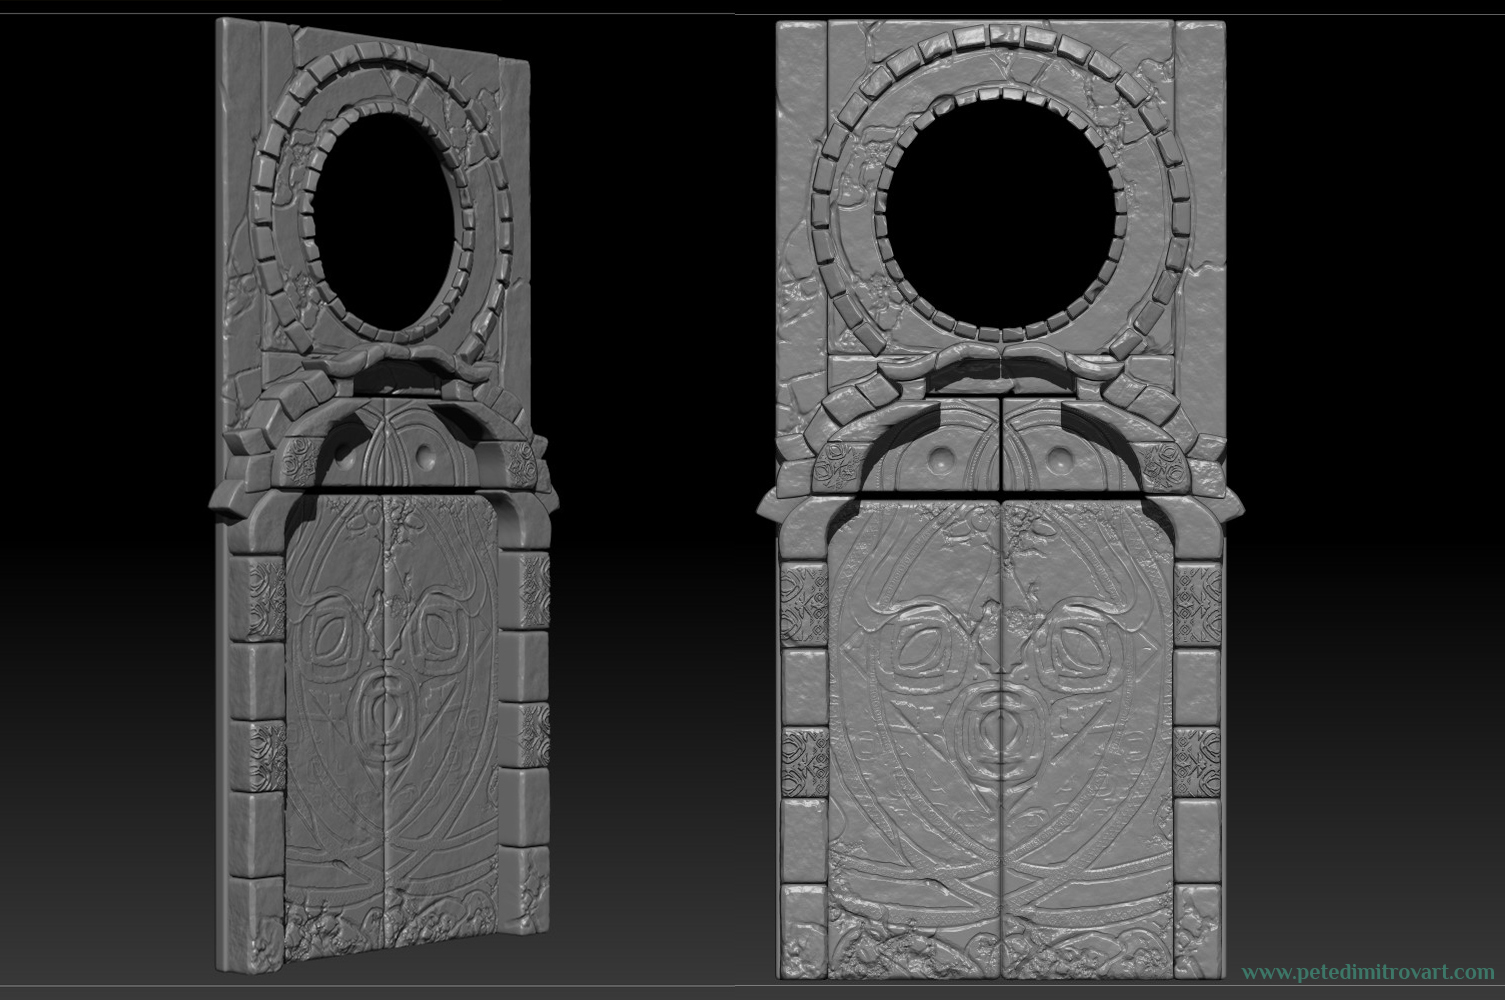 Zbrush screenshot showing the door. The sculpt here is now rich in detail and relief carvings on the surface. Image to the left shows the door at a slight angle, while the image on the right shows it from the very front, in orthographic view.